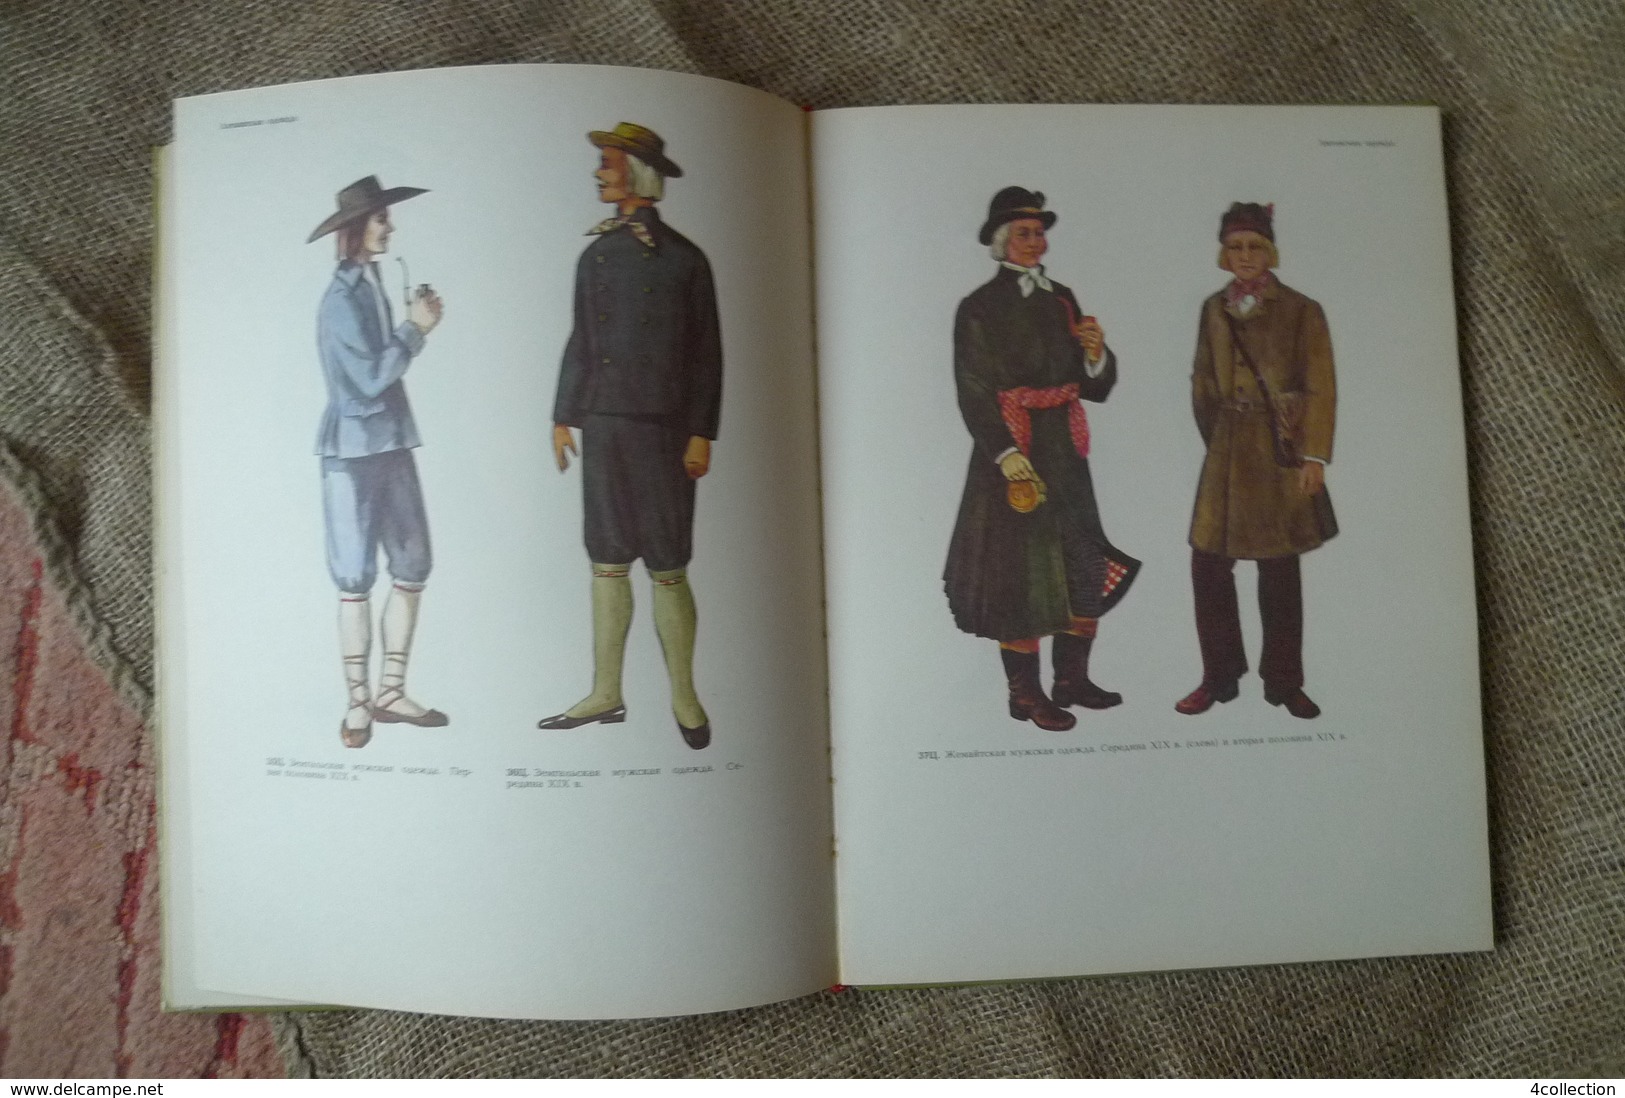 Latvia Riga 1986 Old Book illustrated Historical & Ethnographic Atlas of the Baltic States Traditional Costumes Clothes